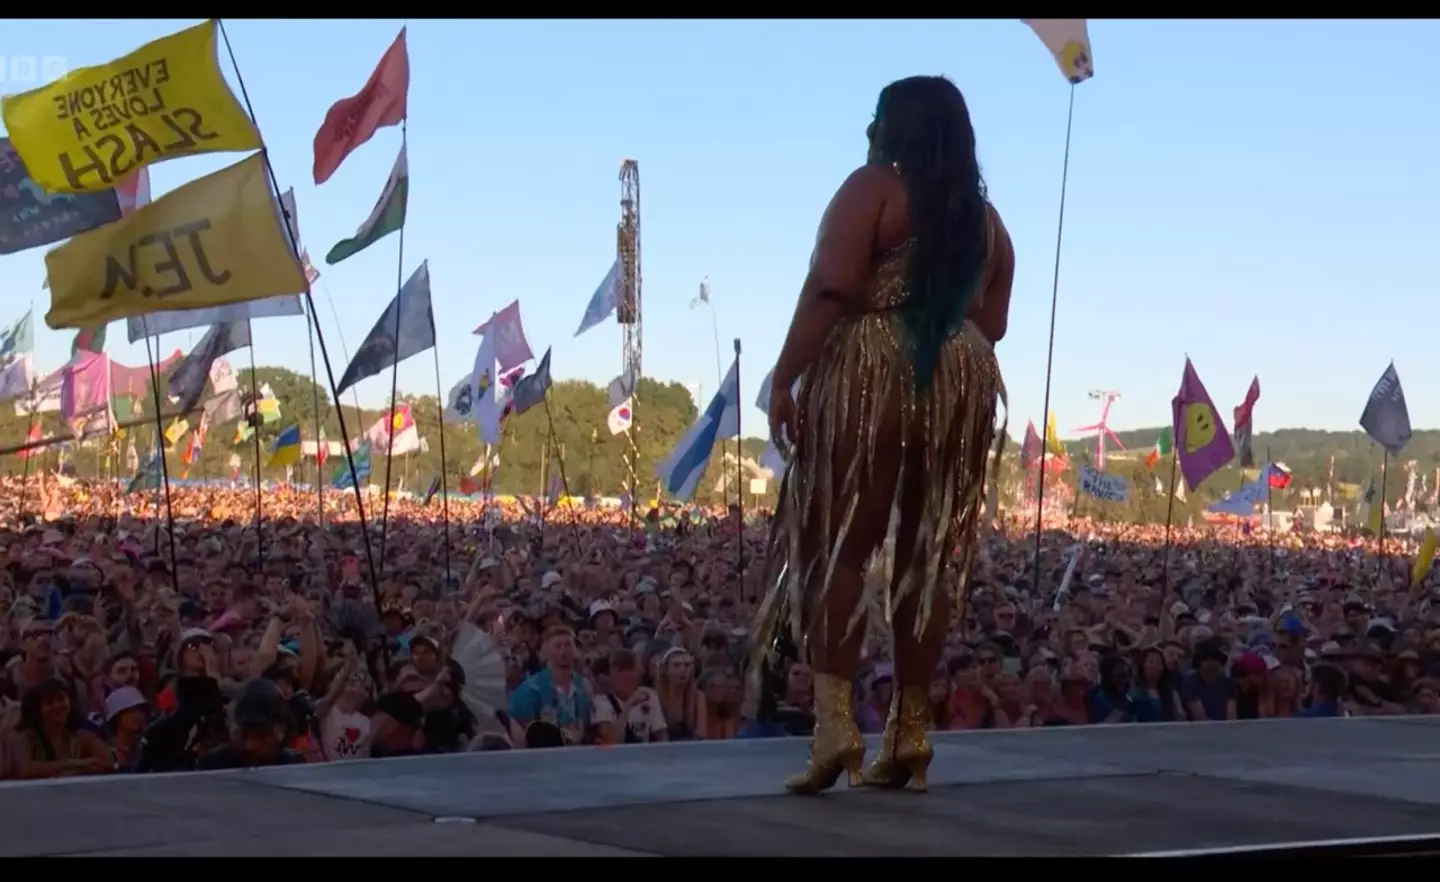 Lizzo told the audience that her first gig at the world-famous festival was in 2018 and took place in a small tent with 'nobody there'.